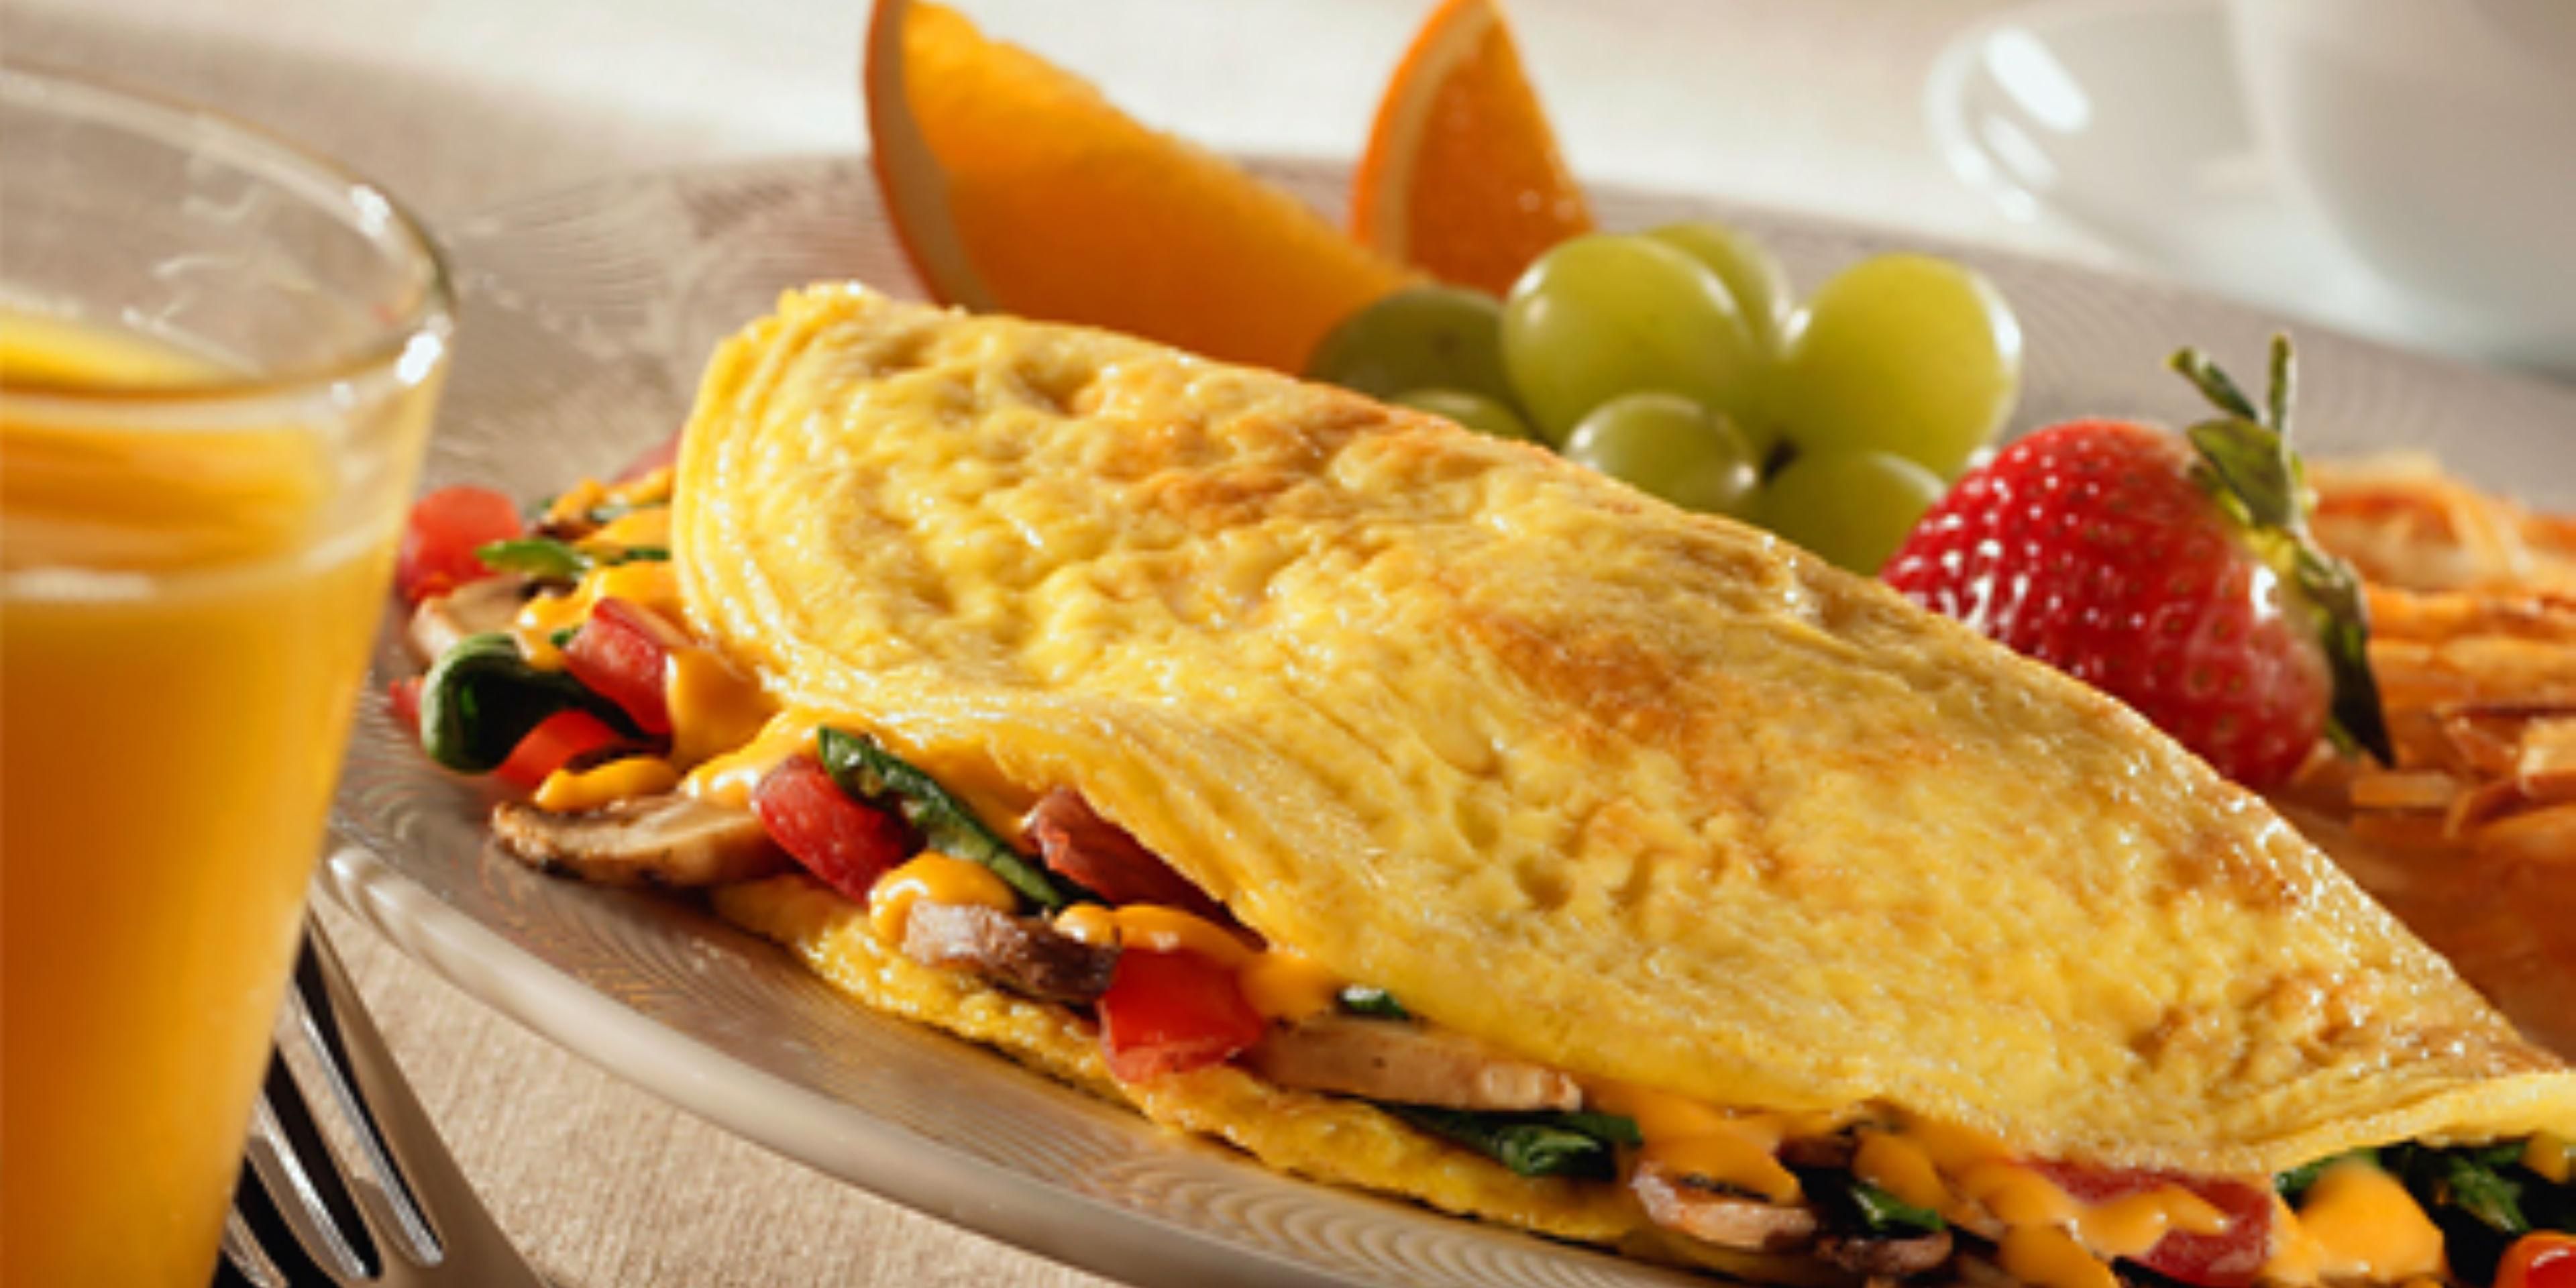 Join us for breakfast daily with cooked to order omelets.